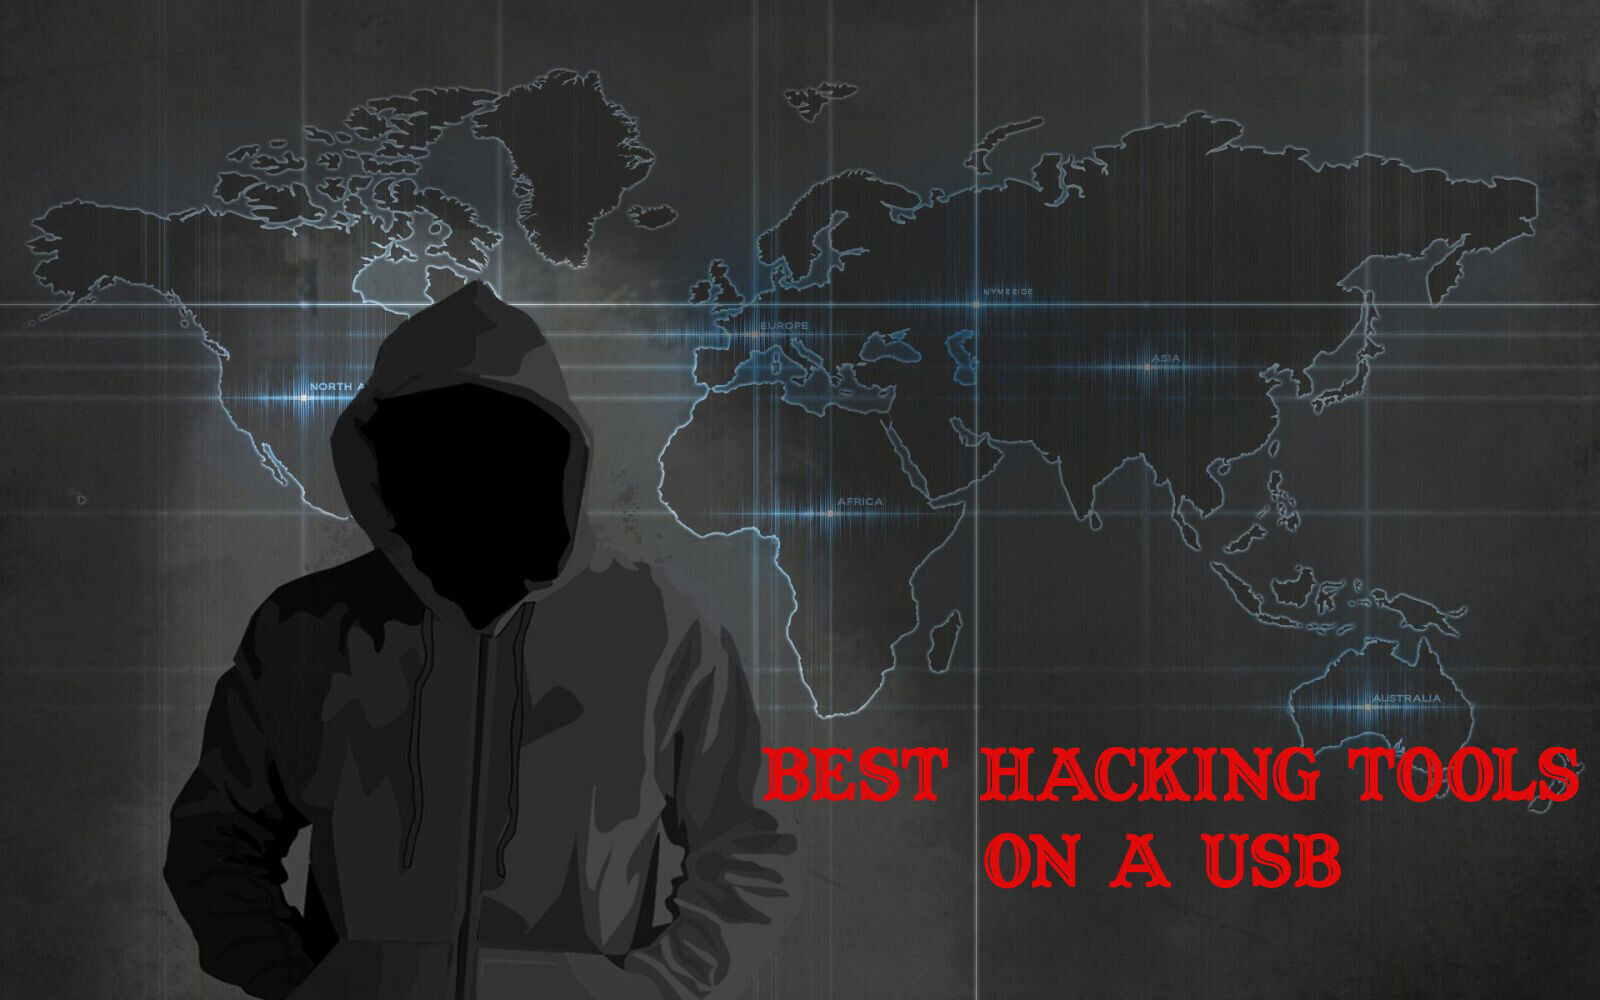 HACKING USB BOOT PRO HACKING OPERATING SYSTEM BUNDLE 1100+TOOLS HACK ANY PC FIX#